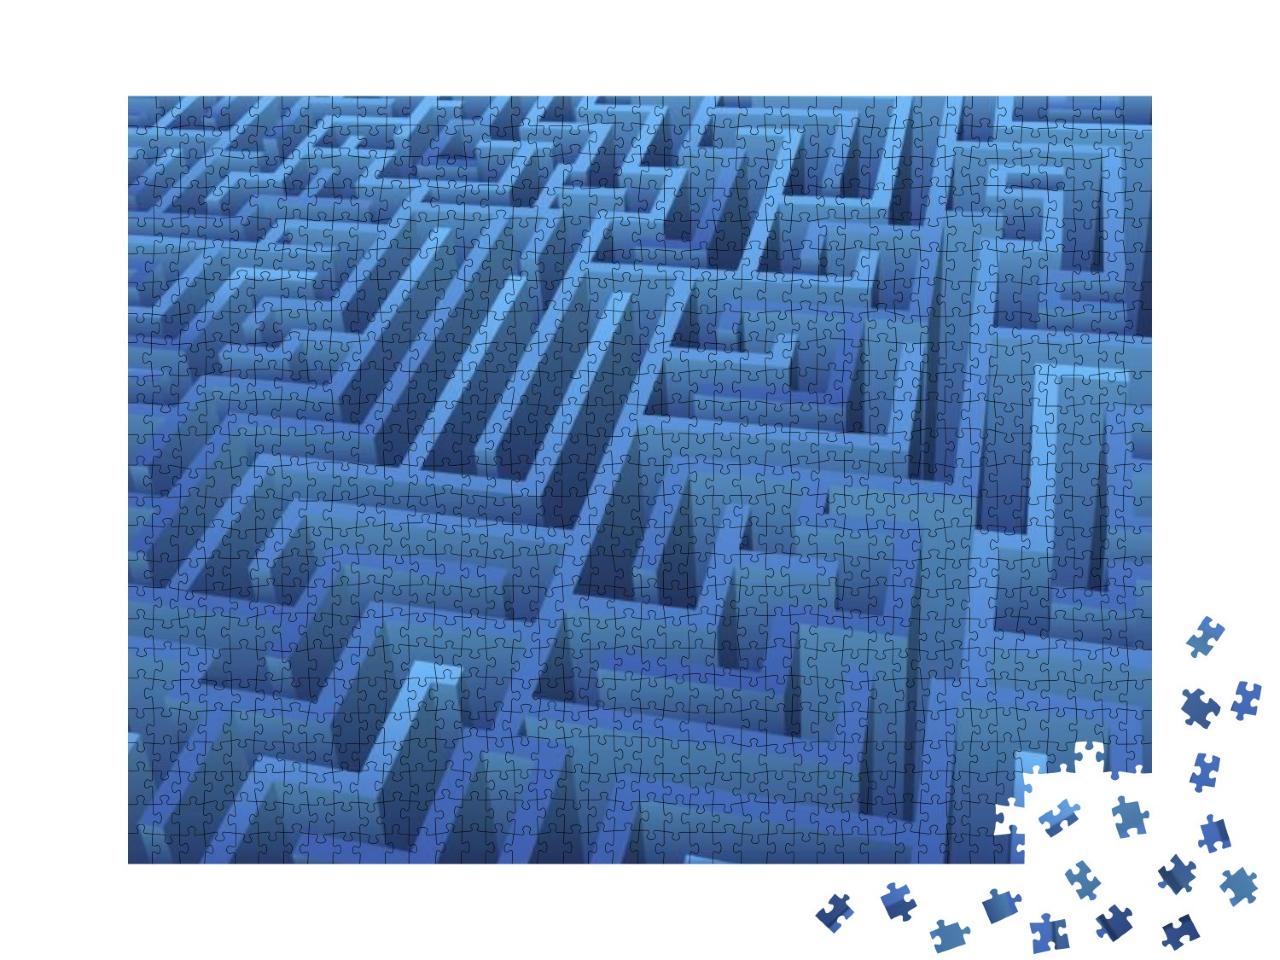 Blue Maze Illustration. Abstract Labyrinth 3D Rendering... Jigsaw Puzzle with 1000 pieces